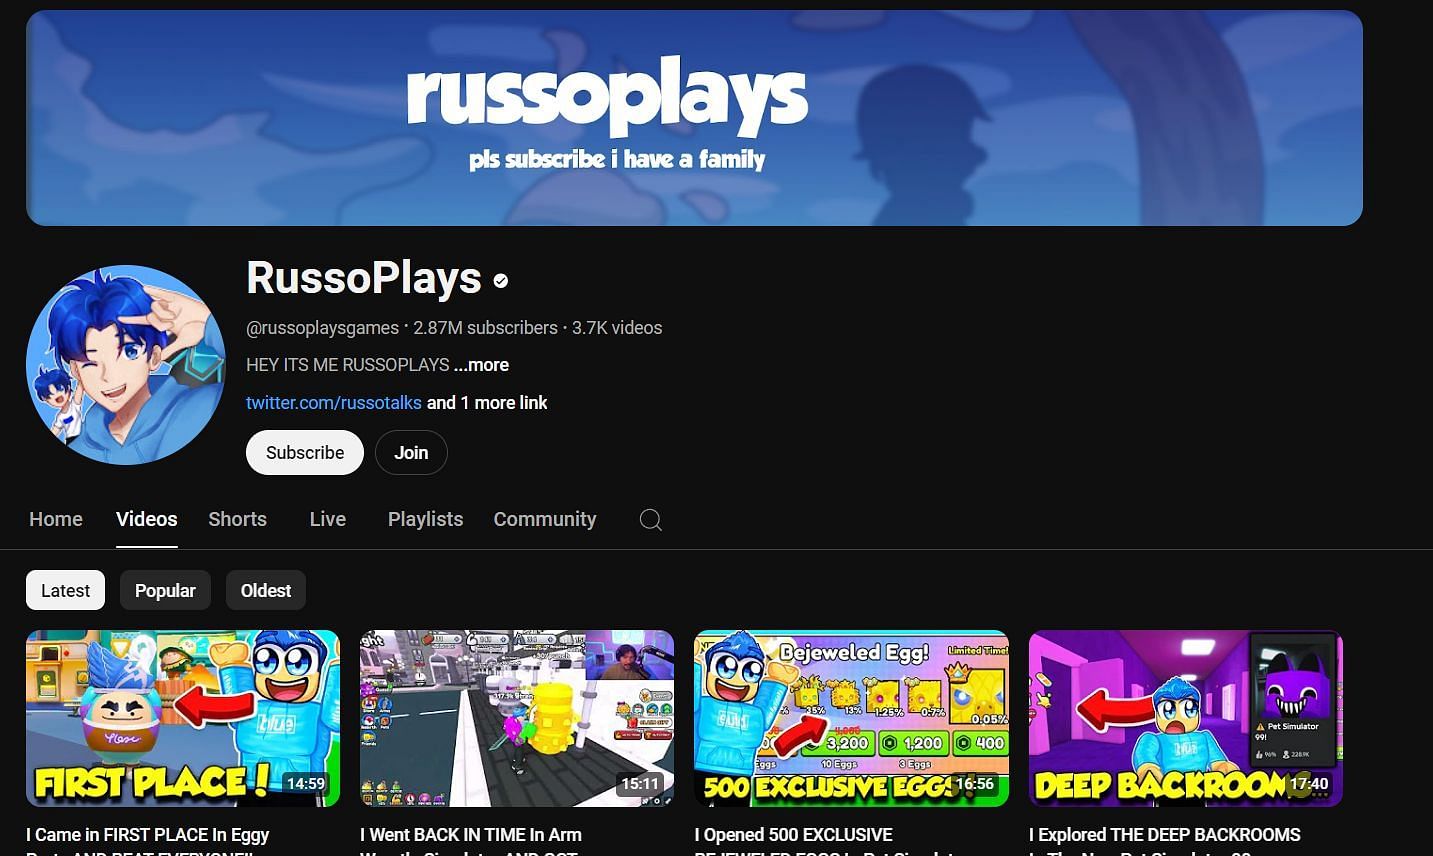 RussoPlays has great content revolving around the platform and its games (Image via YouTube/RussoPlays)